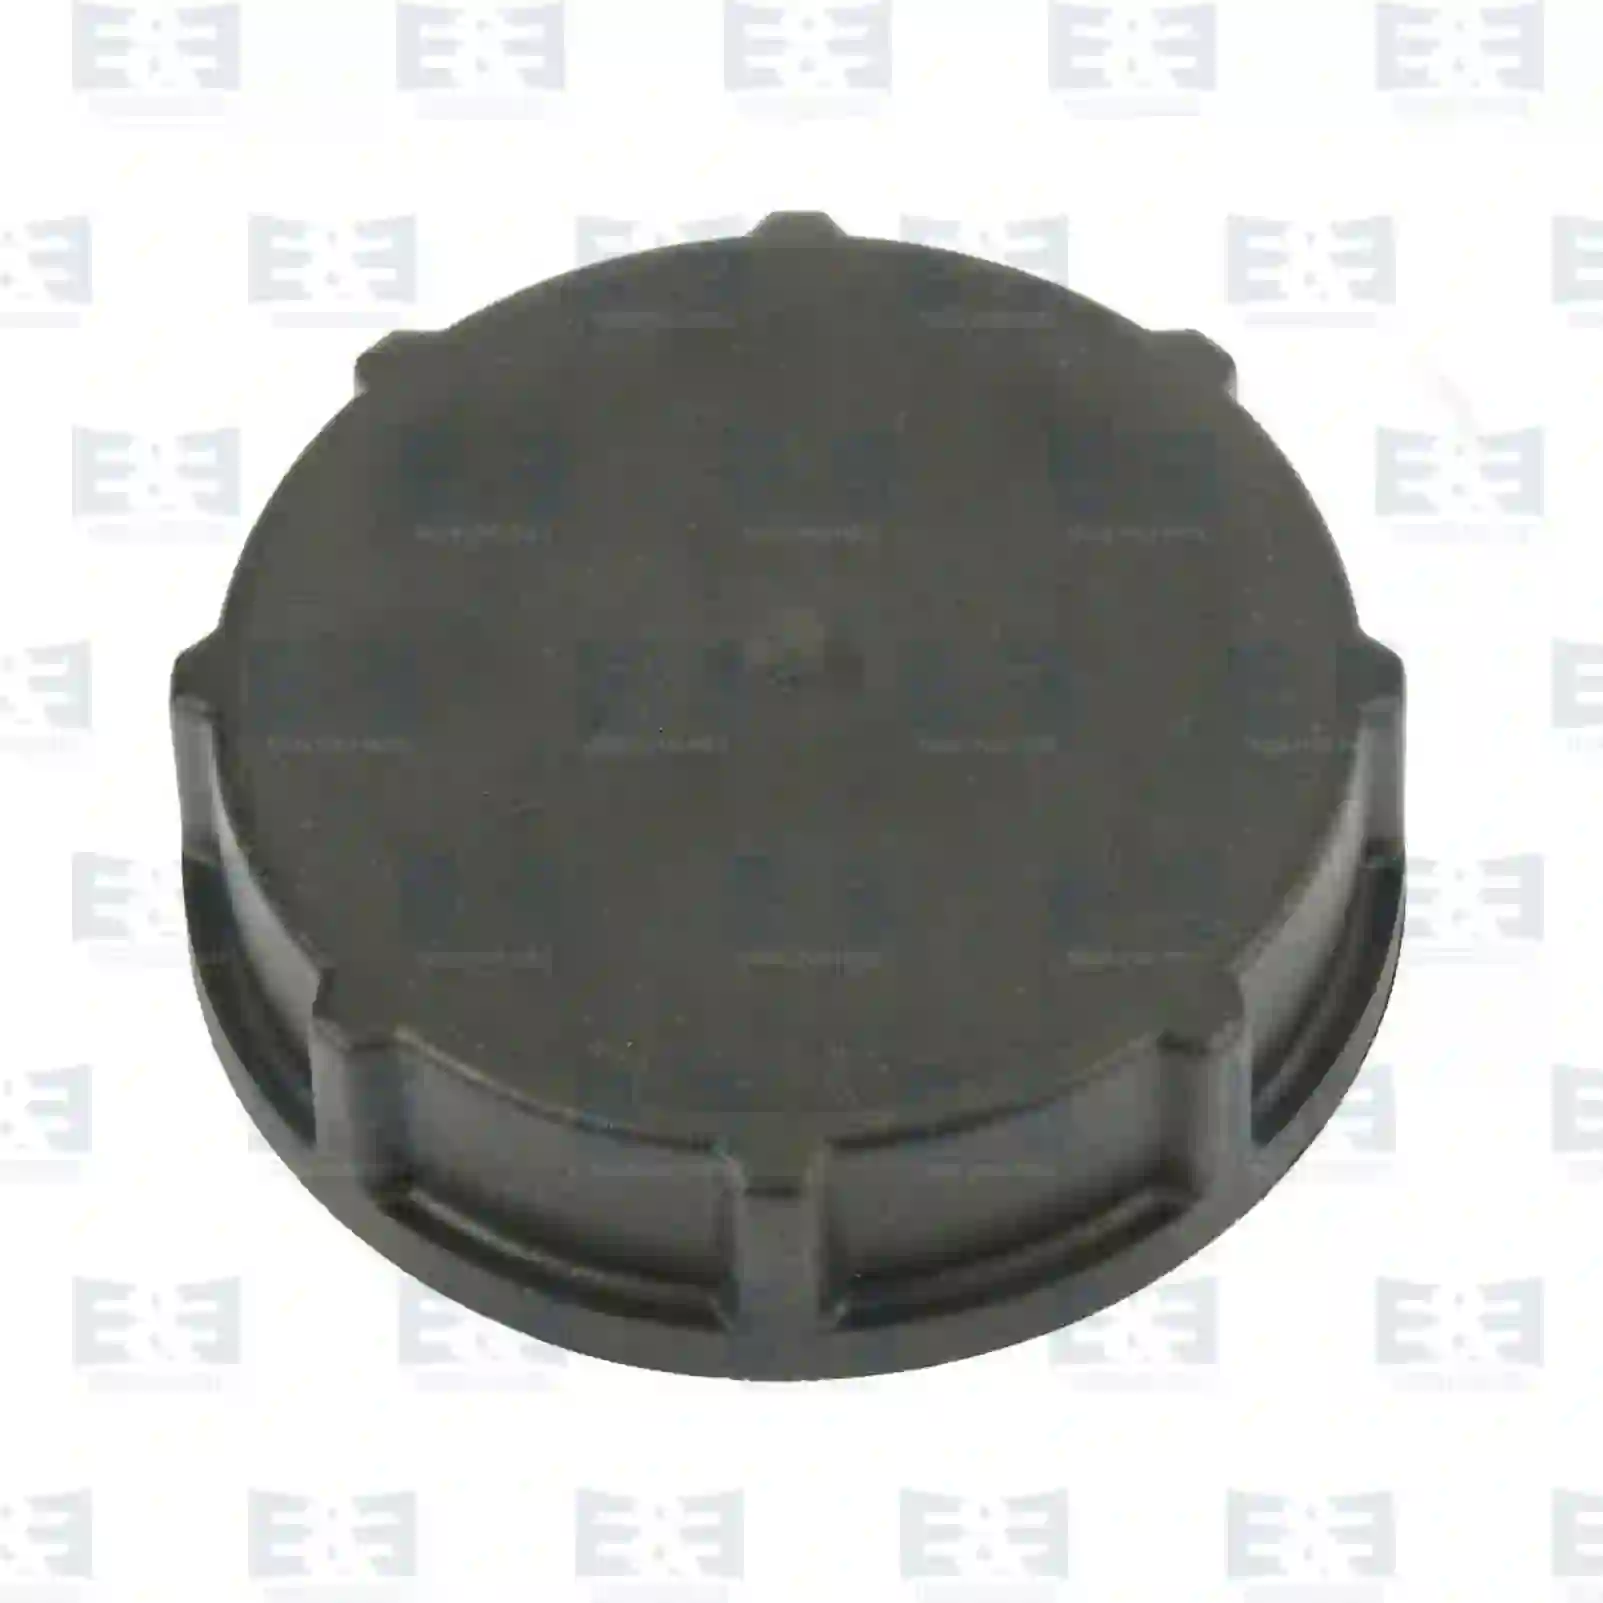 Oil Container, Steering Cap, oil container, EE No 2E2205882 ,  oem no:0699214, 1320044, 699214, 93193396, 81473020007, 81473020011, 81473020013, 0004660068, 0004660568, 0004660668, 5001868180, 1343243, 2433704, 318537, 1696361, 21392400, 85141593, 2V5422195A, ZG02536-0008 E&E Truck Spare Parts | Truck Spare Parts, Auotomotive Spare Parts